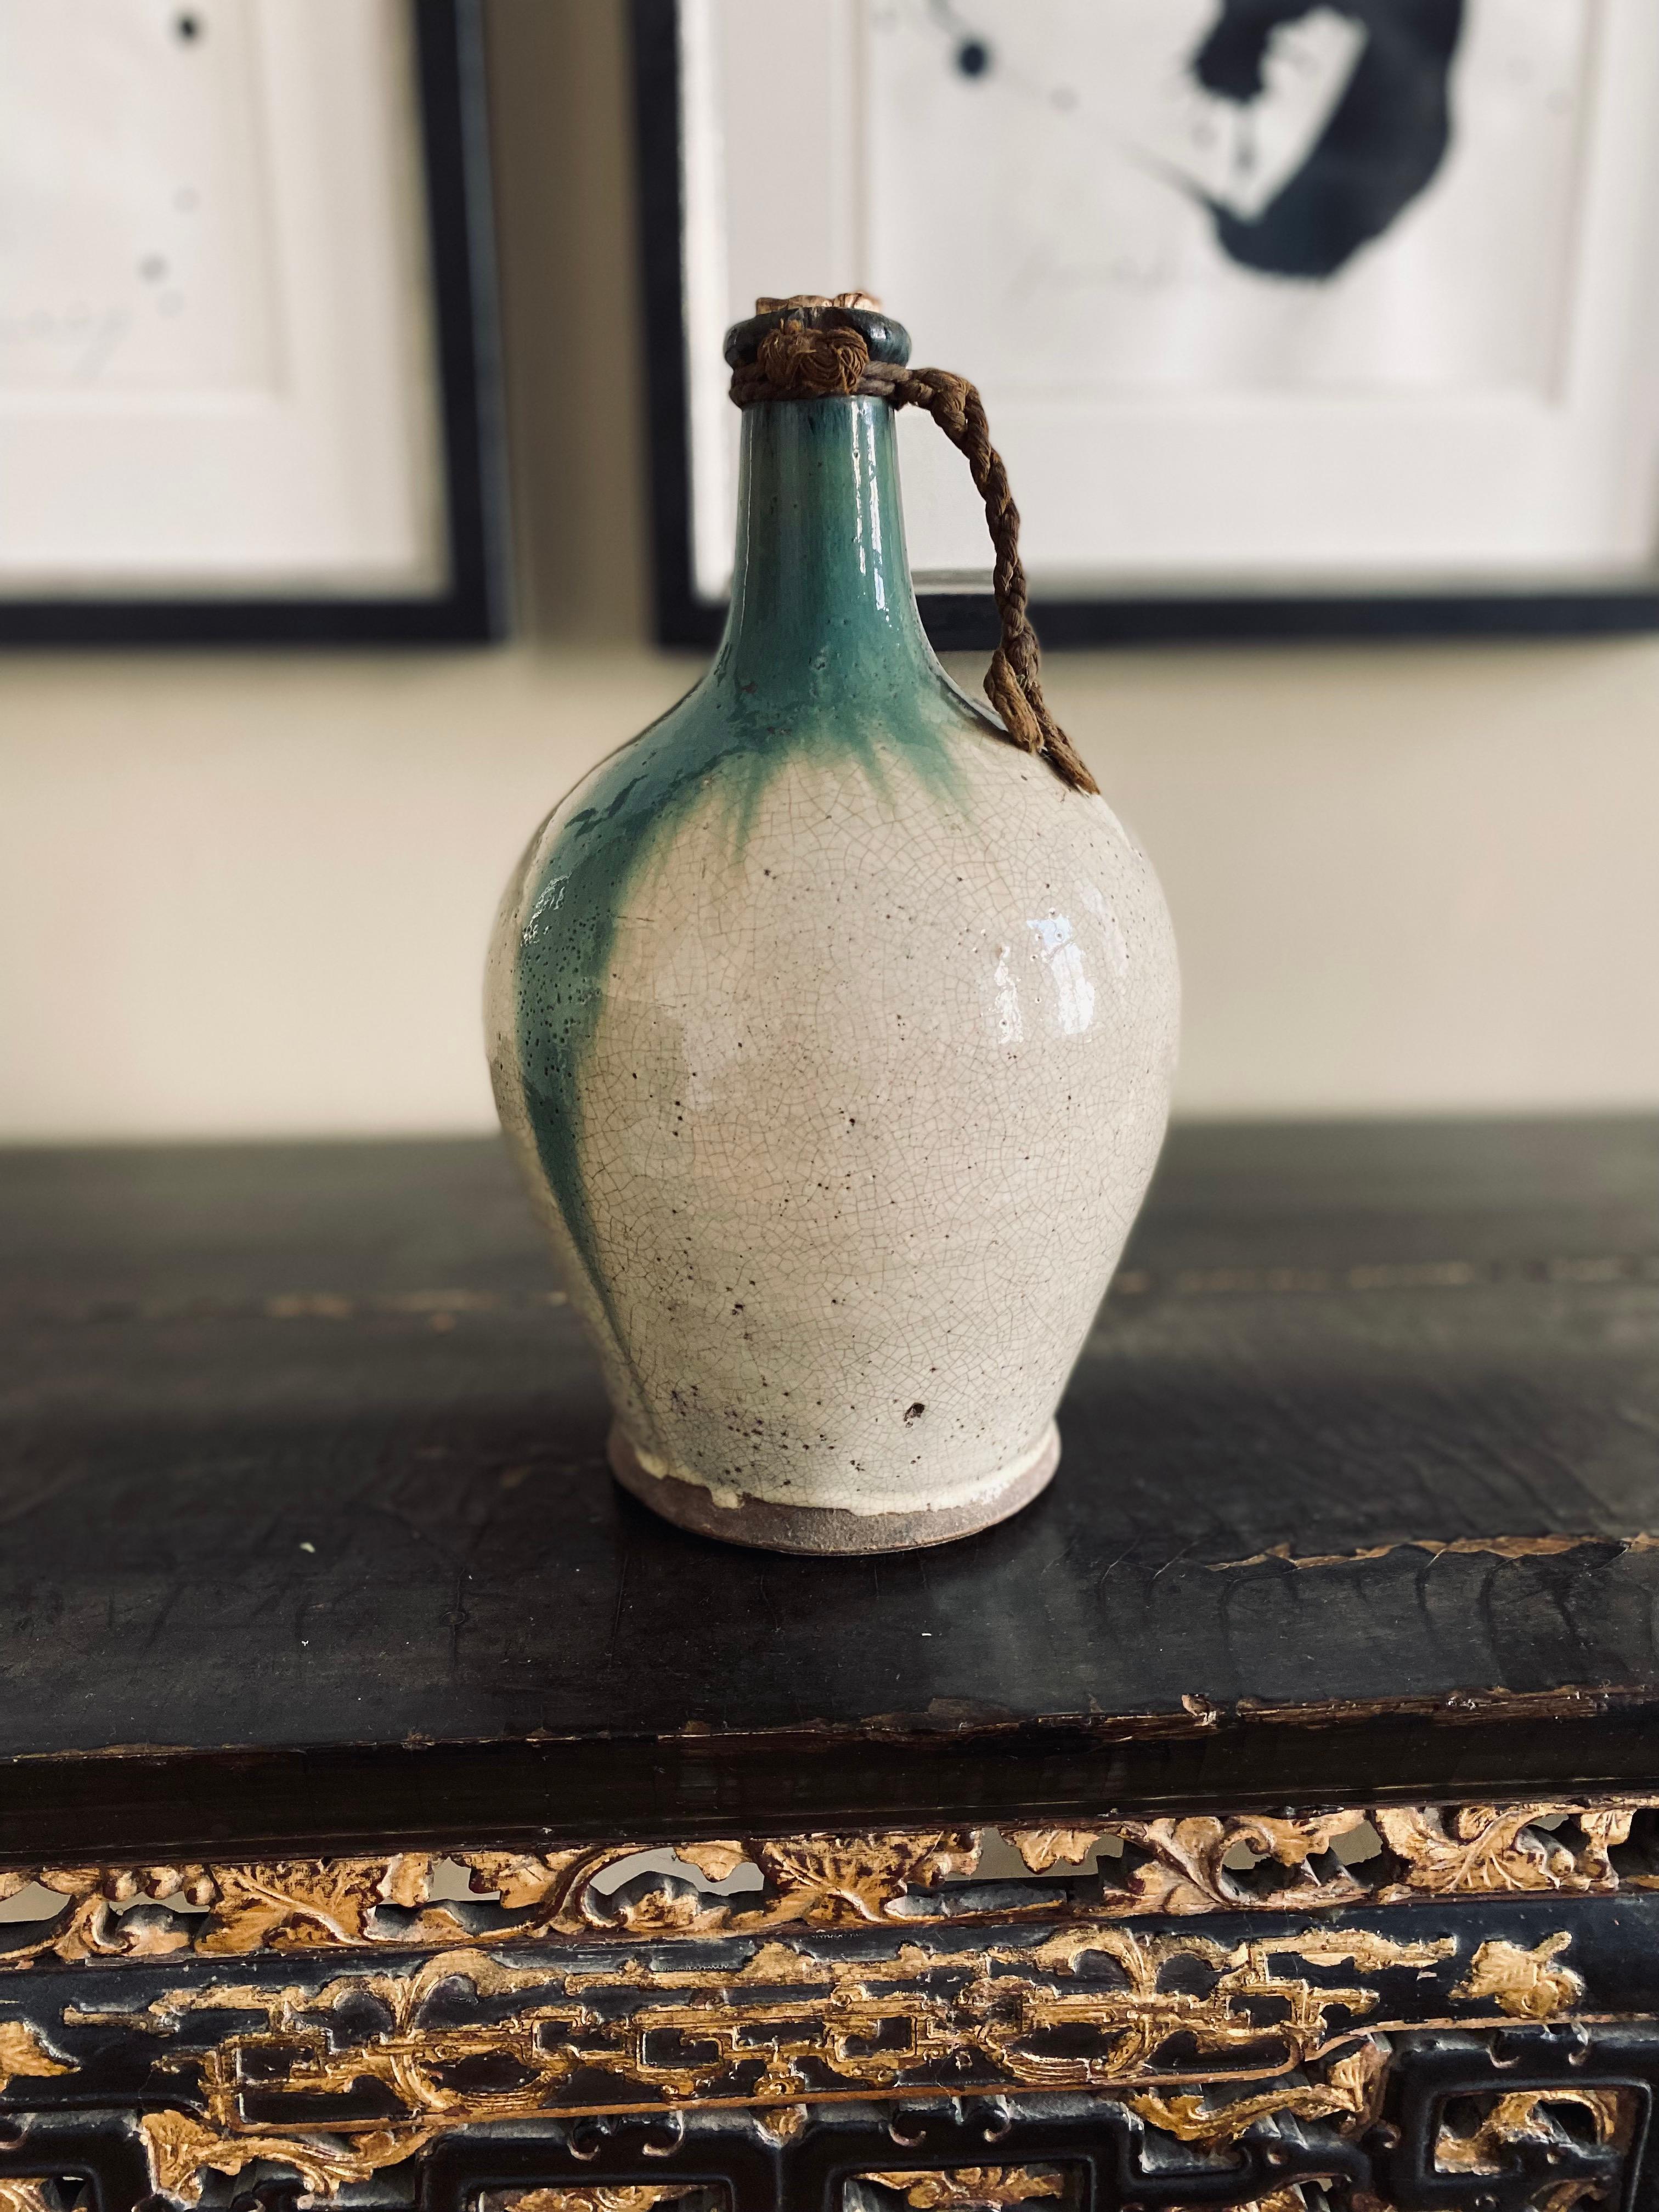 This Japanese sake bottle made of Seto ceramics dates from the late 19th century and can therefore be assigned to the Meiji period. It is in good condition and extremely decorative. Like many Japanese art objects, it impresses with its simplicity